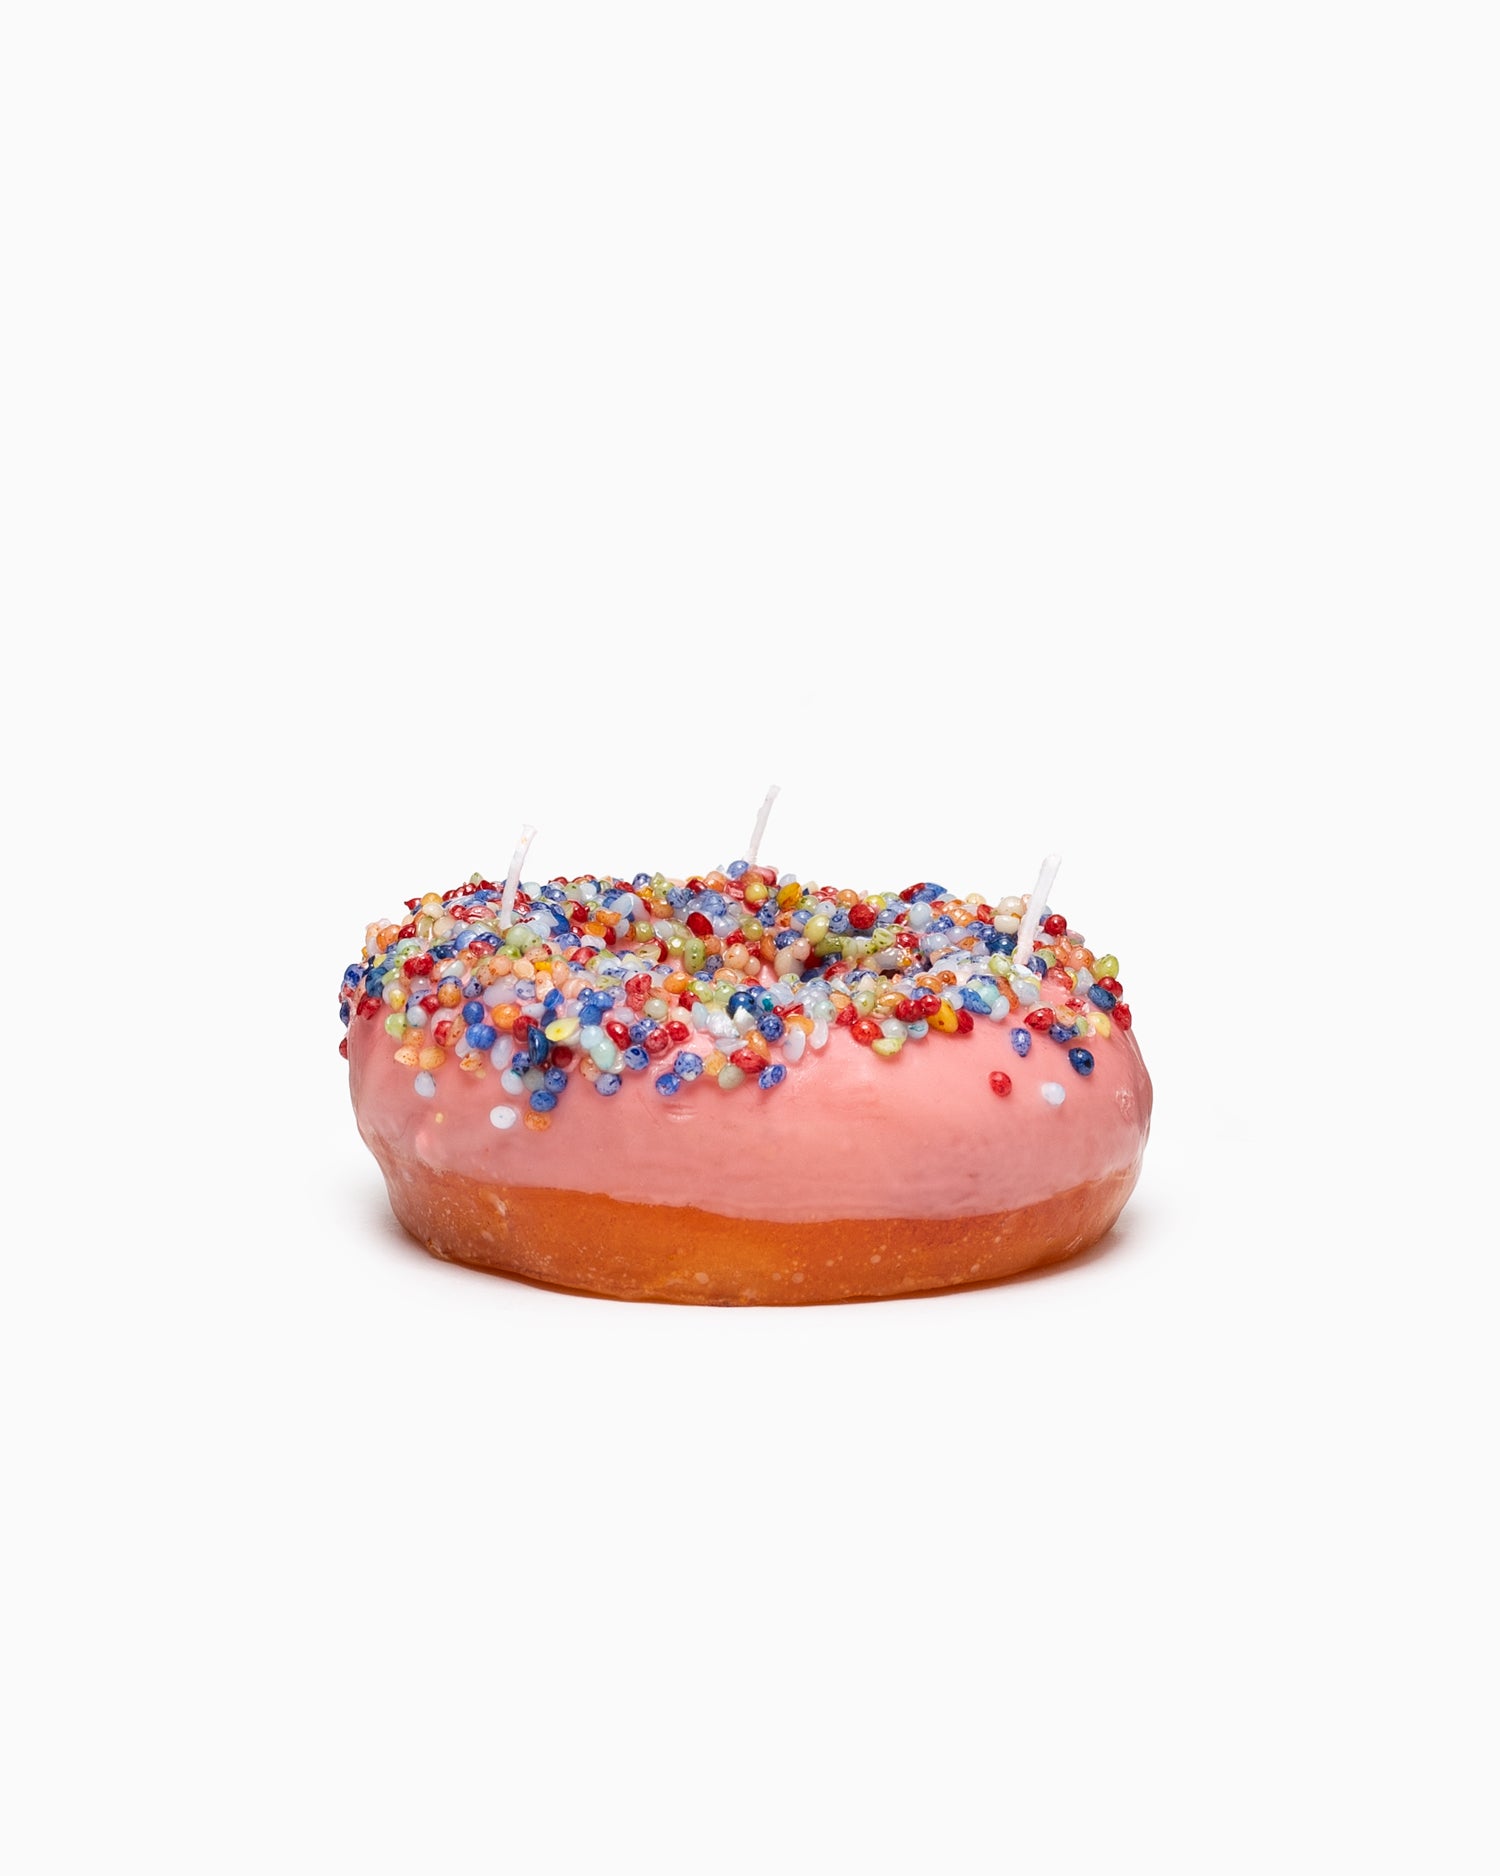 Donut Candle - Pink Glazed with Rainbow Sprinkles